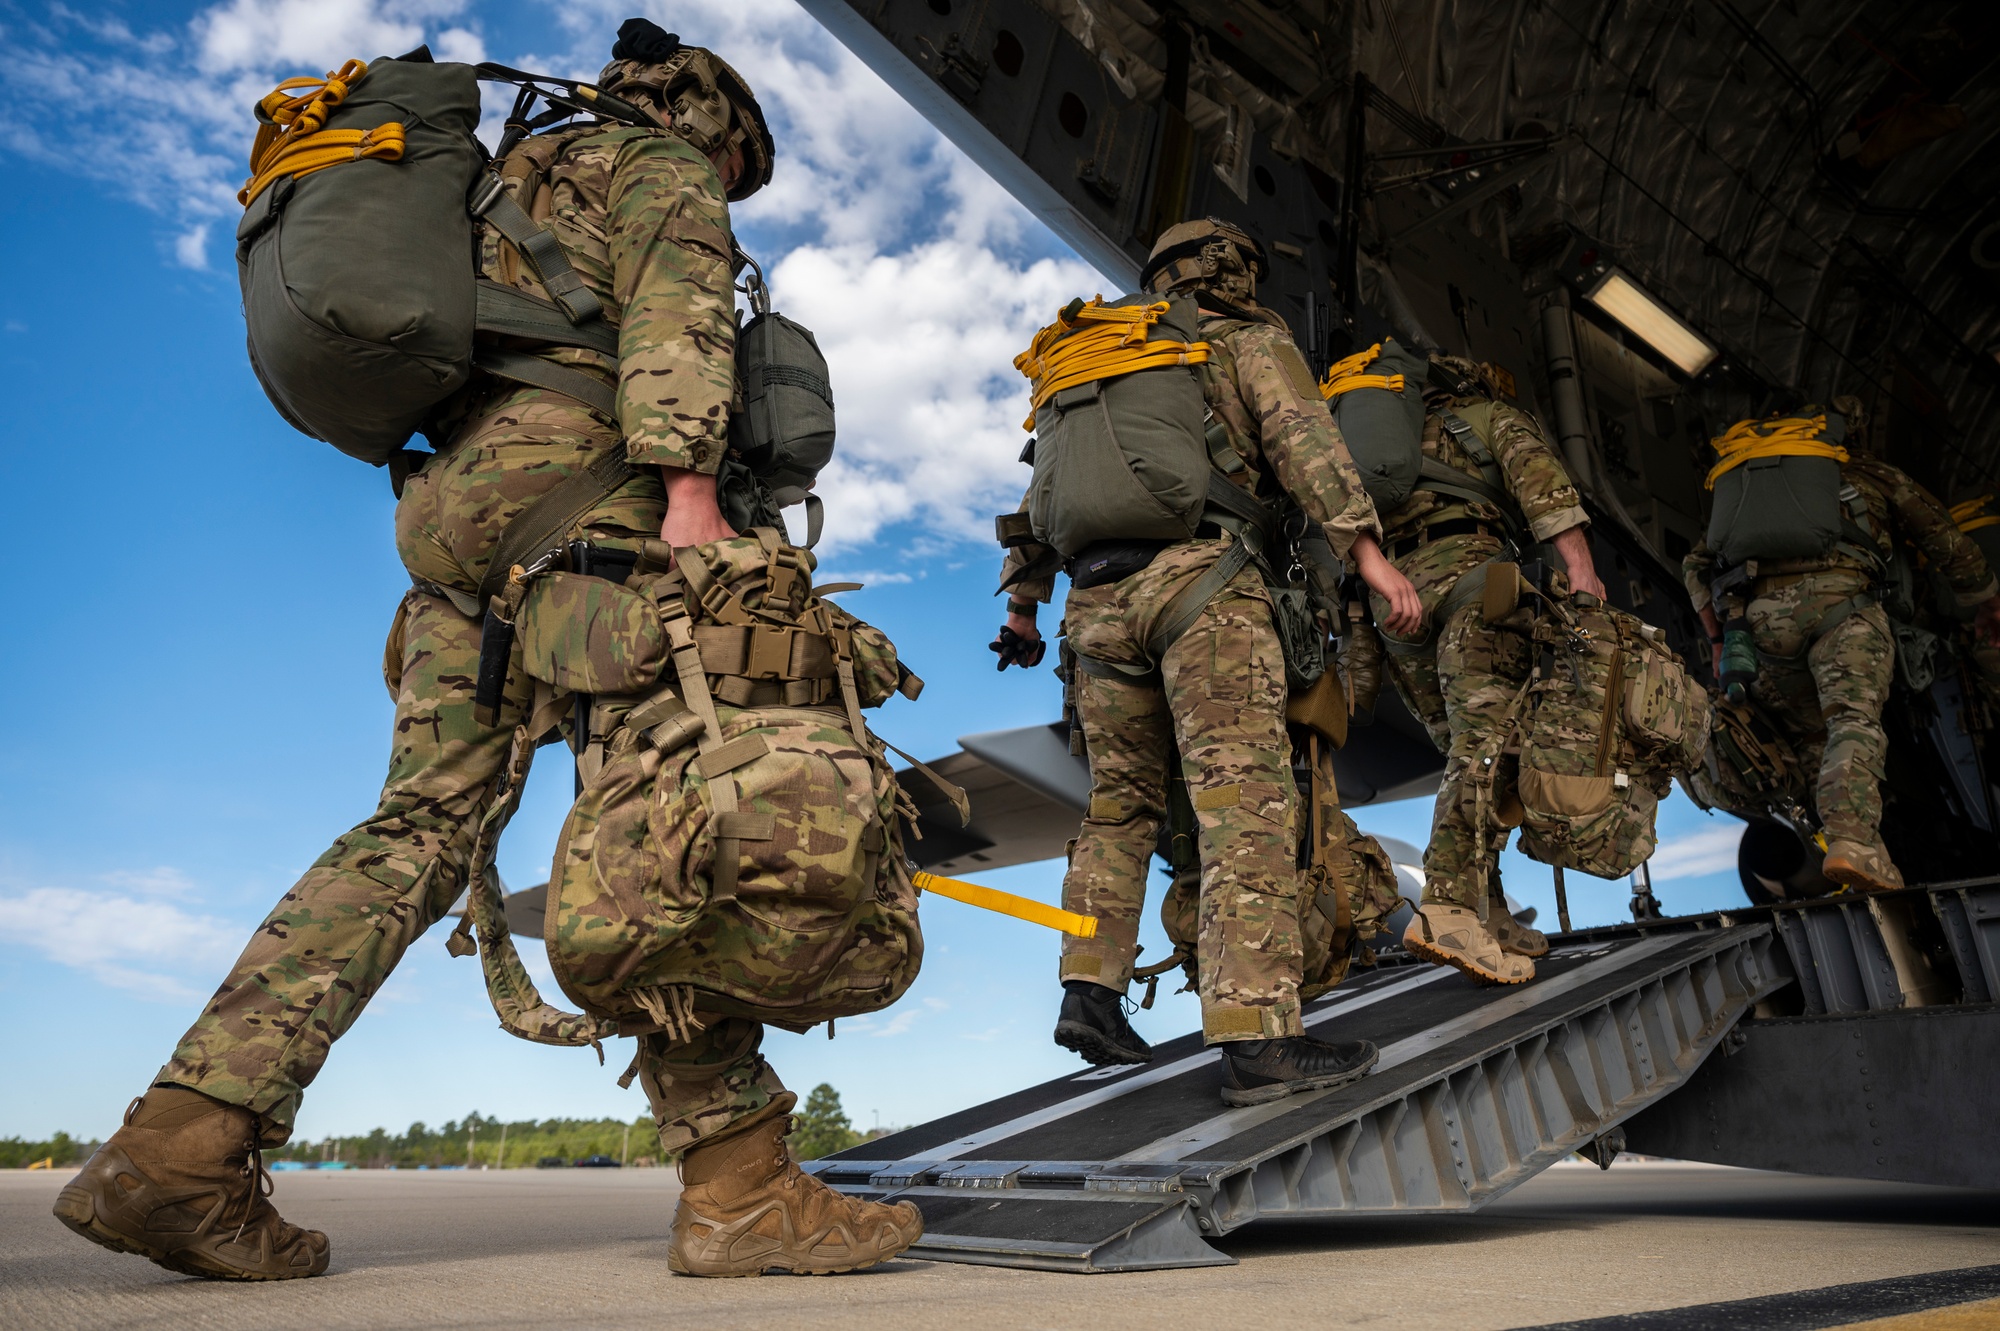 Images - Special Tactics Airmen perform static line jump, demonstrate  lethality through rapid mobility [Image 17 of 24] - DVIDS